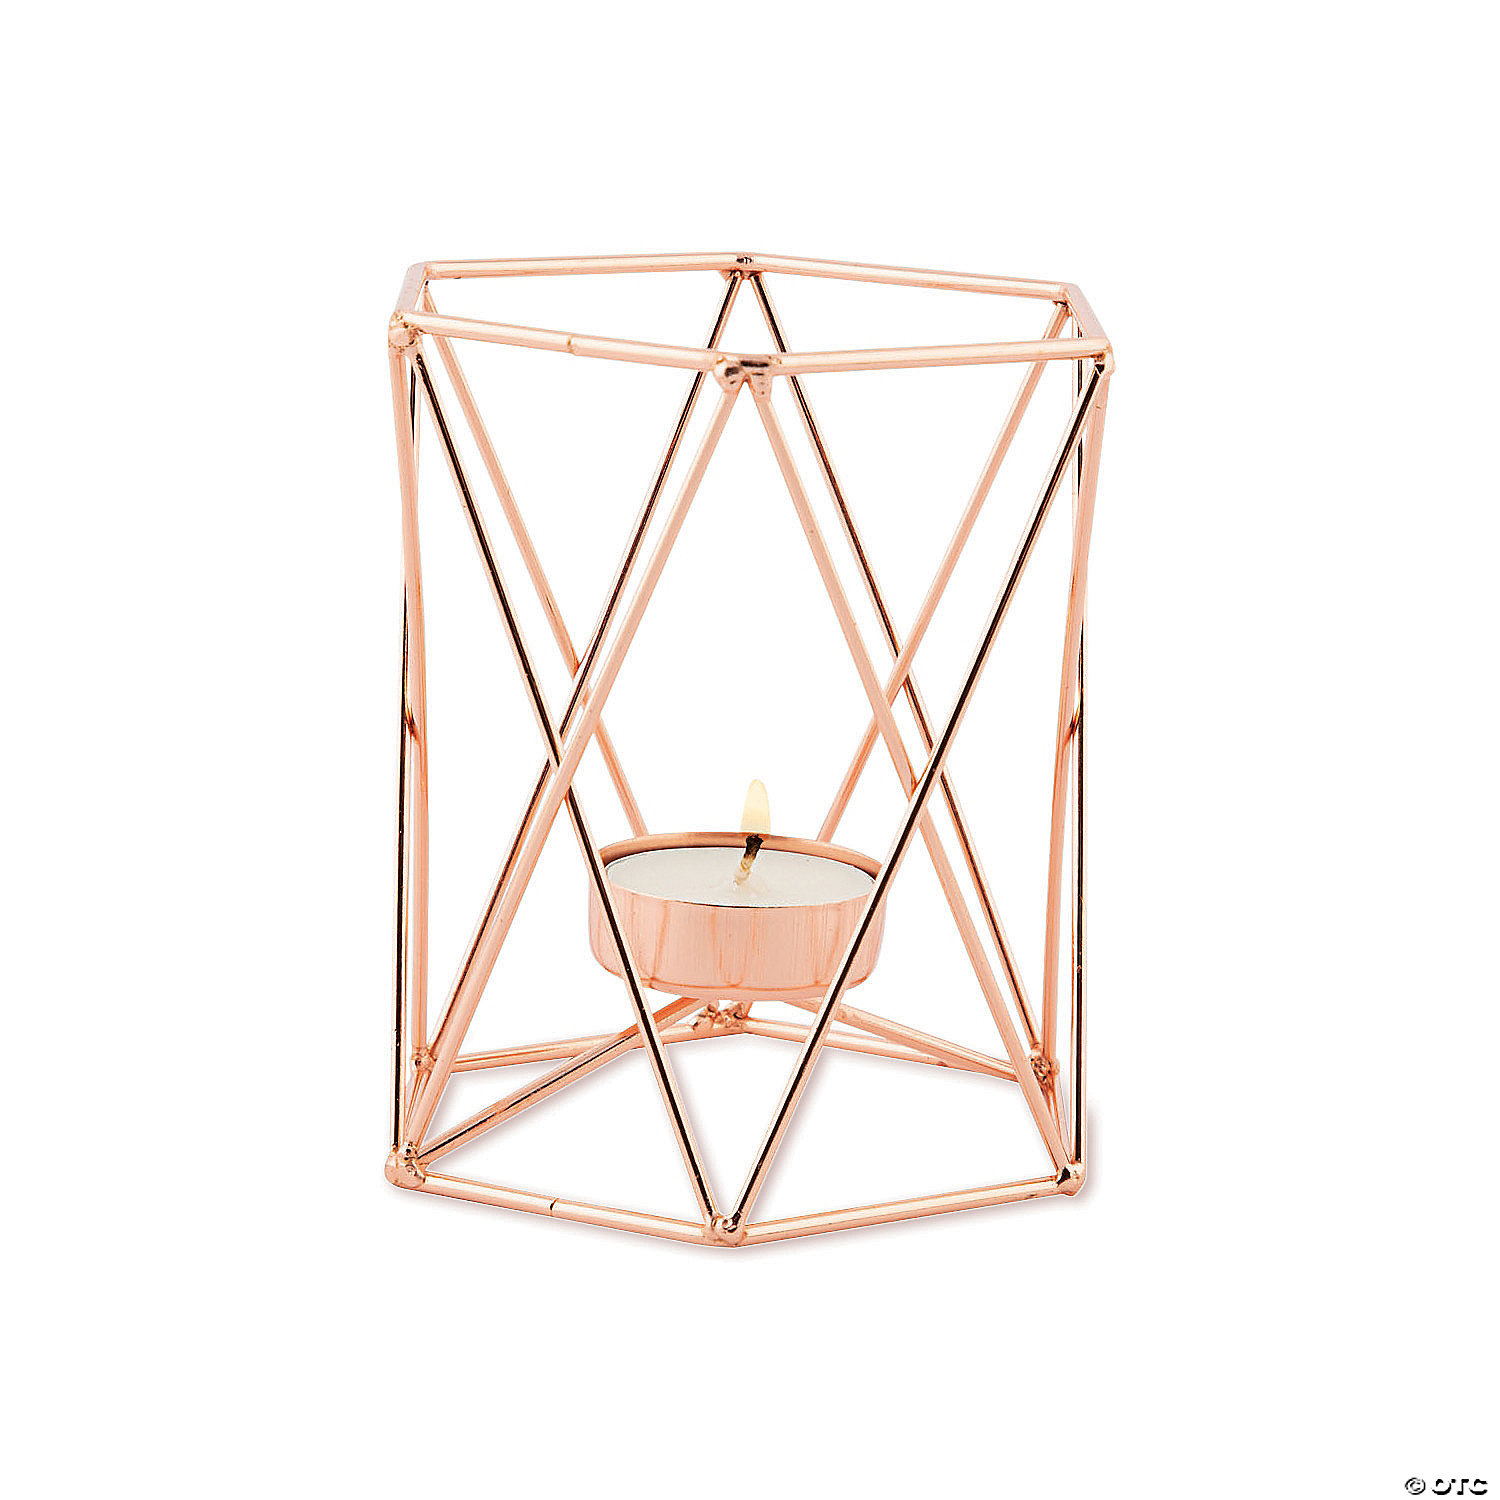 FunMove Rose Gold Geometric Candlestick Metal Candle Holder Tea Light Holders for Home Party Wedding Bar Decoration Craft Accessories 